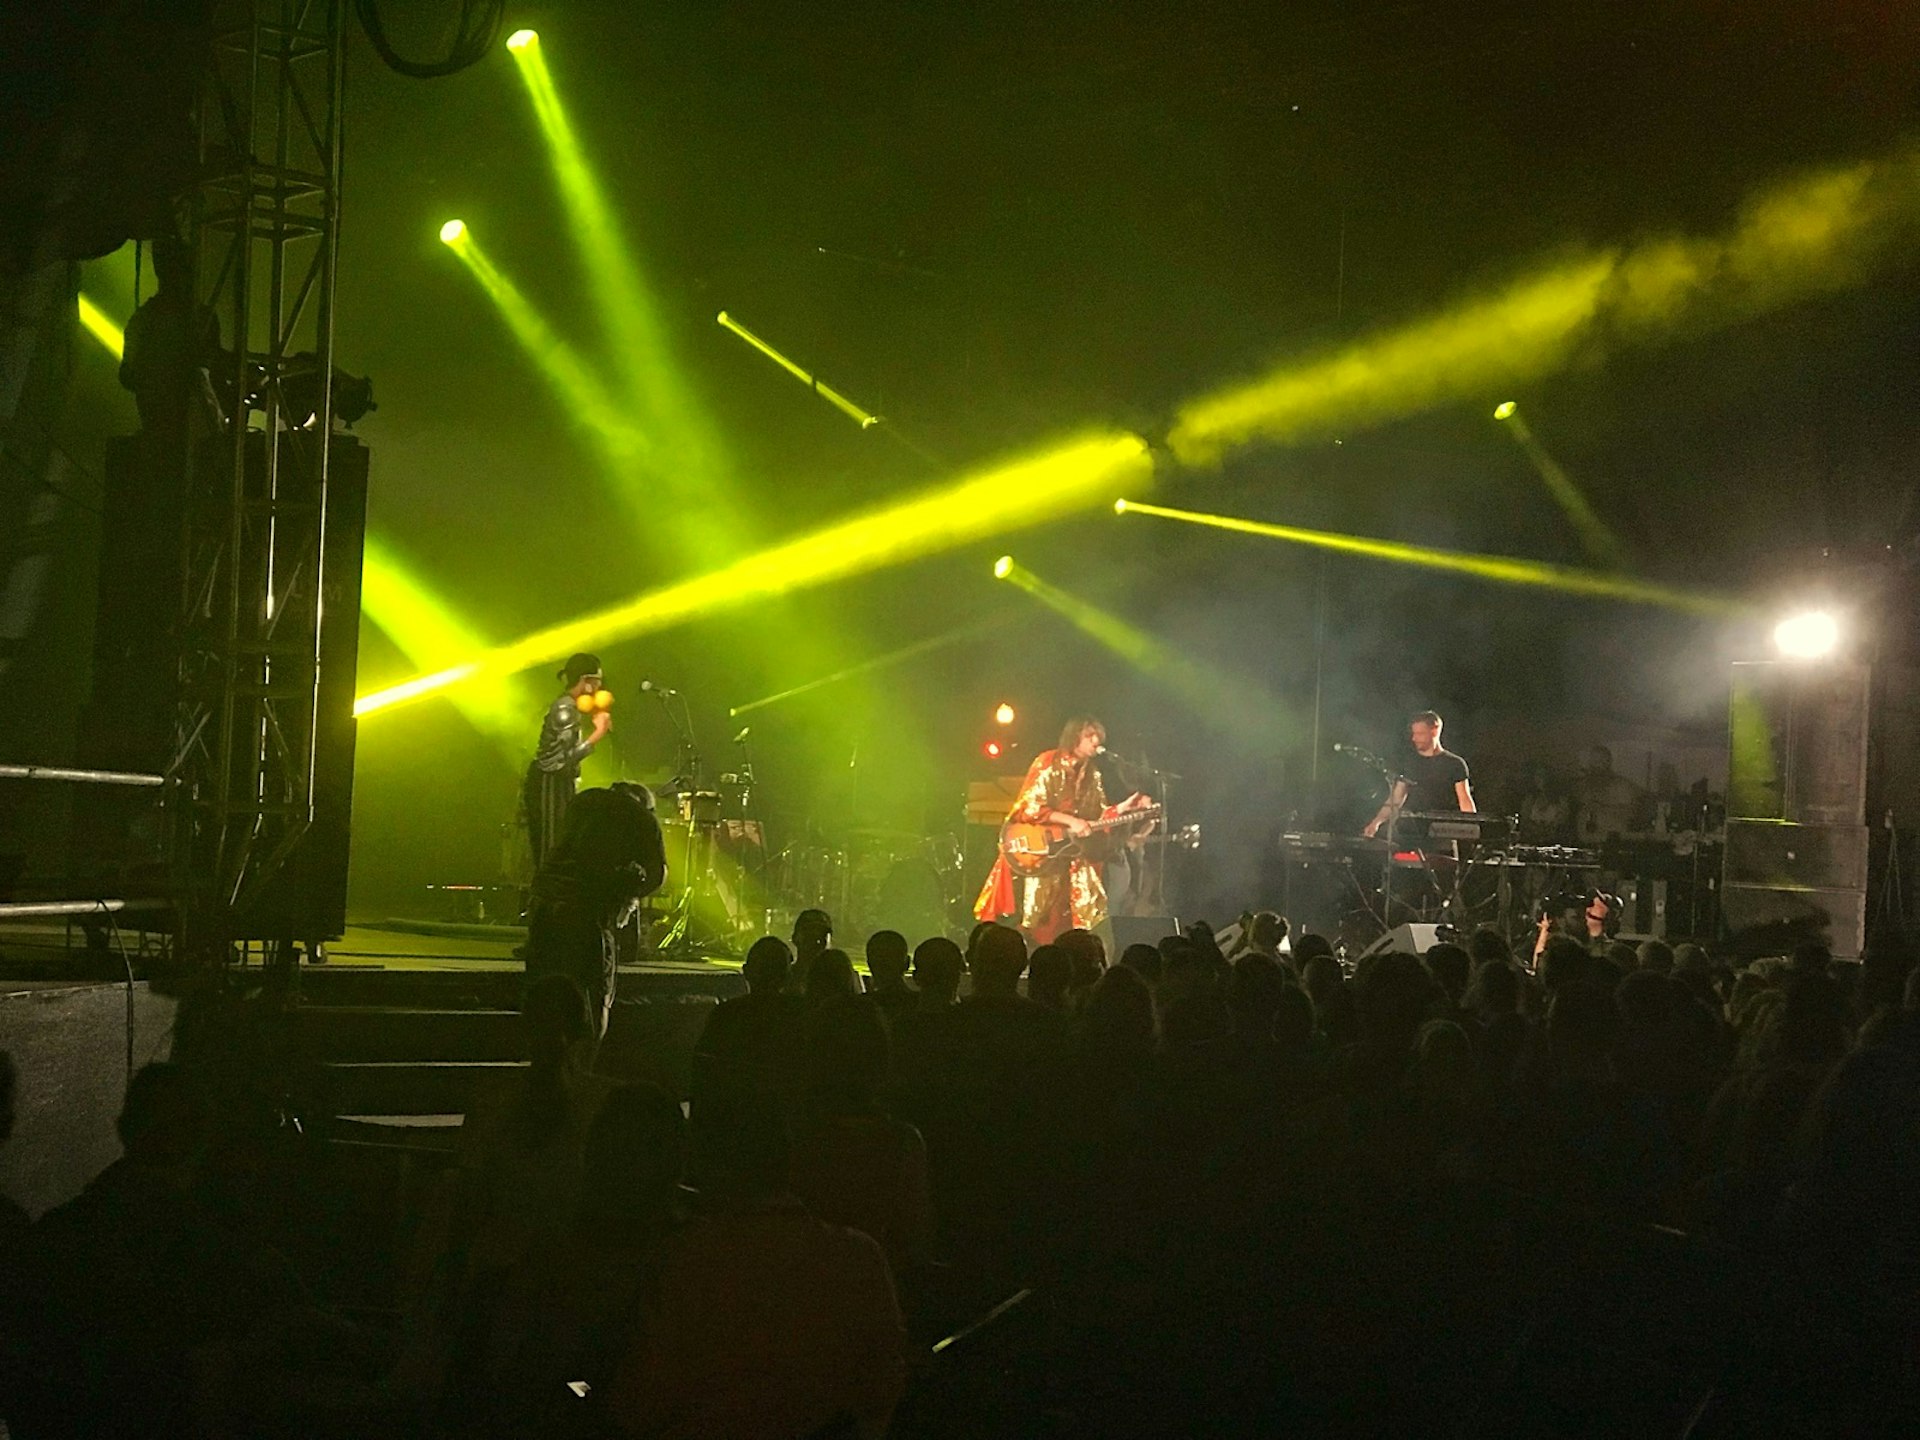 Yellow laser lights illuminate a smoky atmosphere on stage at a music festival